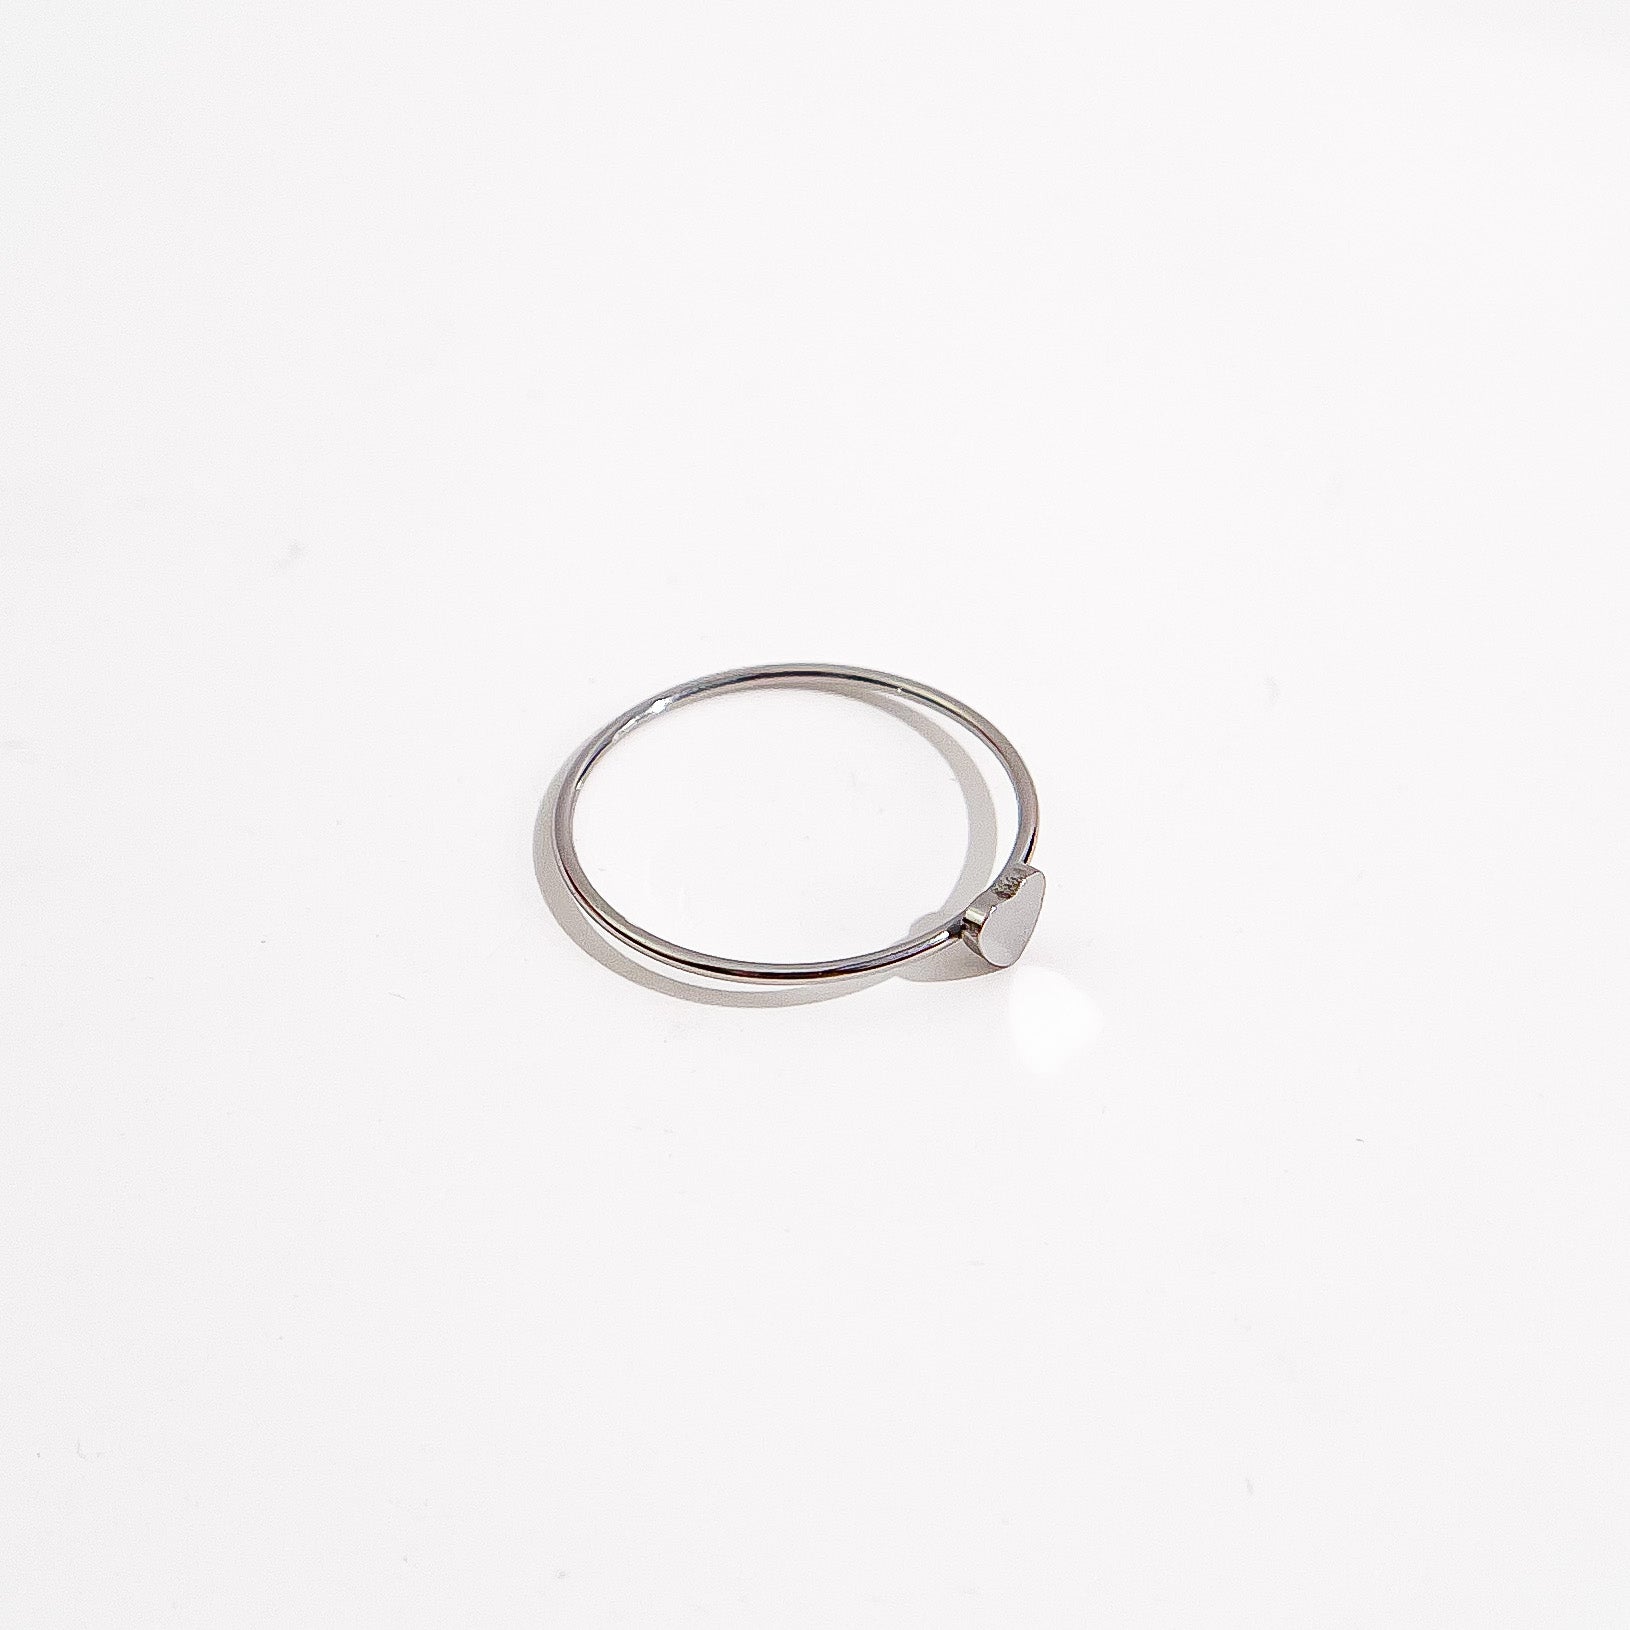 Dainty Heart Ring in Silver - Flaire & Co.